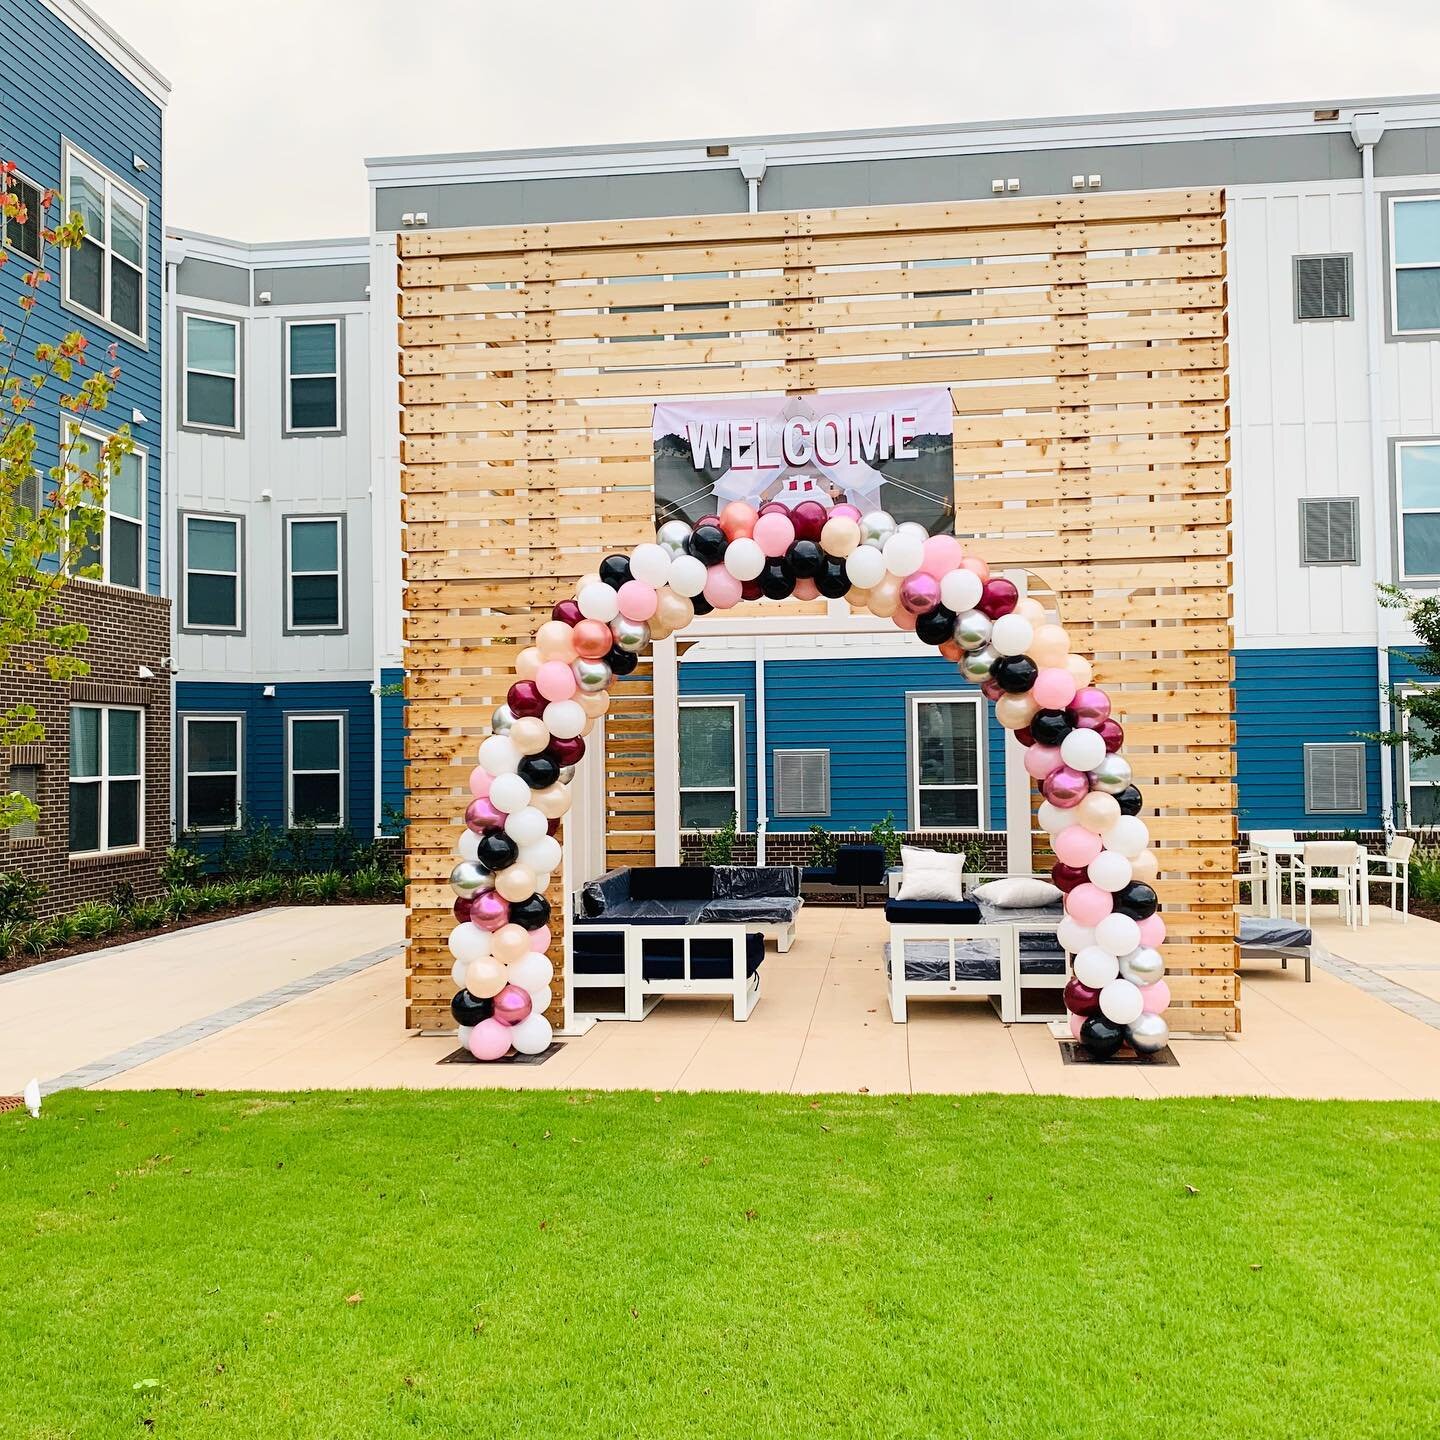 Yayy it&rsquo;s move in day @latitudeonhillsboroughapts !! 

#balloons #balloondecor #balloonarch #raleigh #raleighnc #hillsboroughnc #moveinday #students #ncstate #ncevents #jujabel